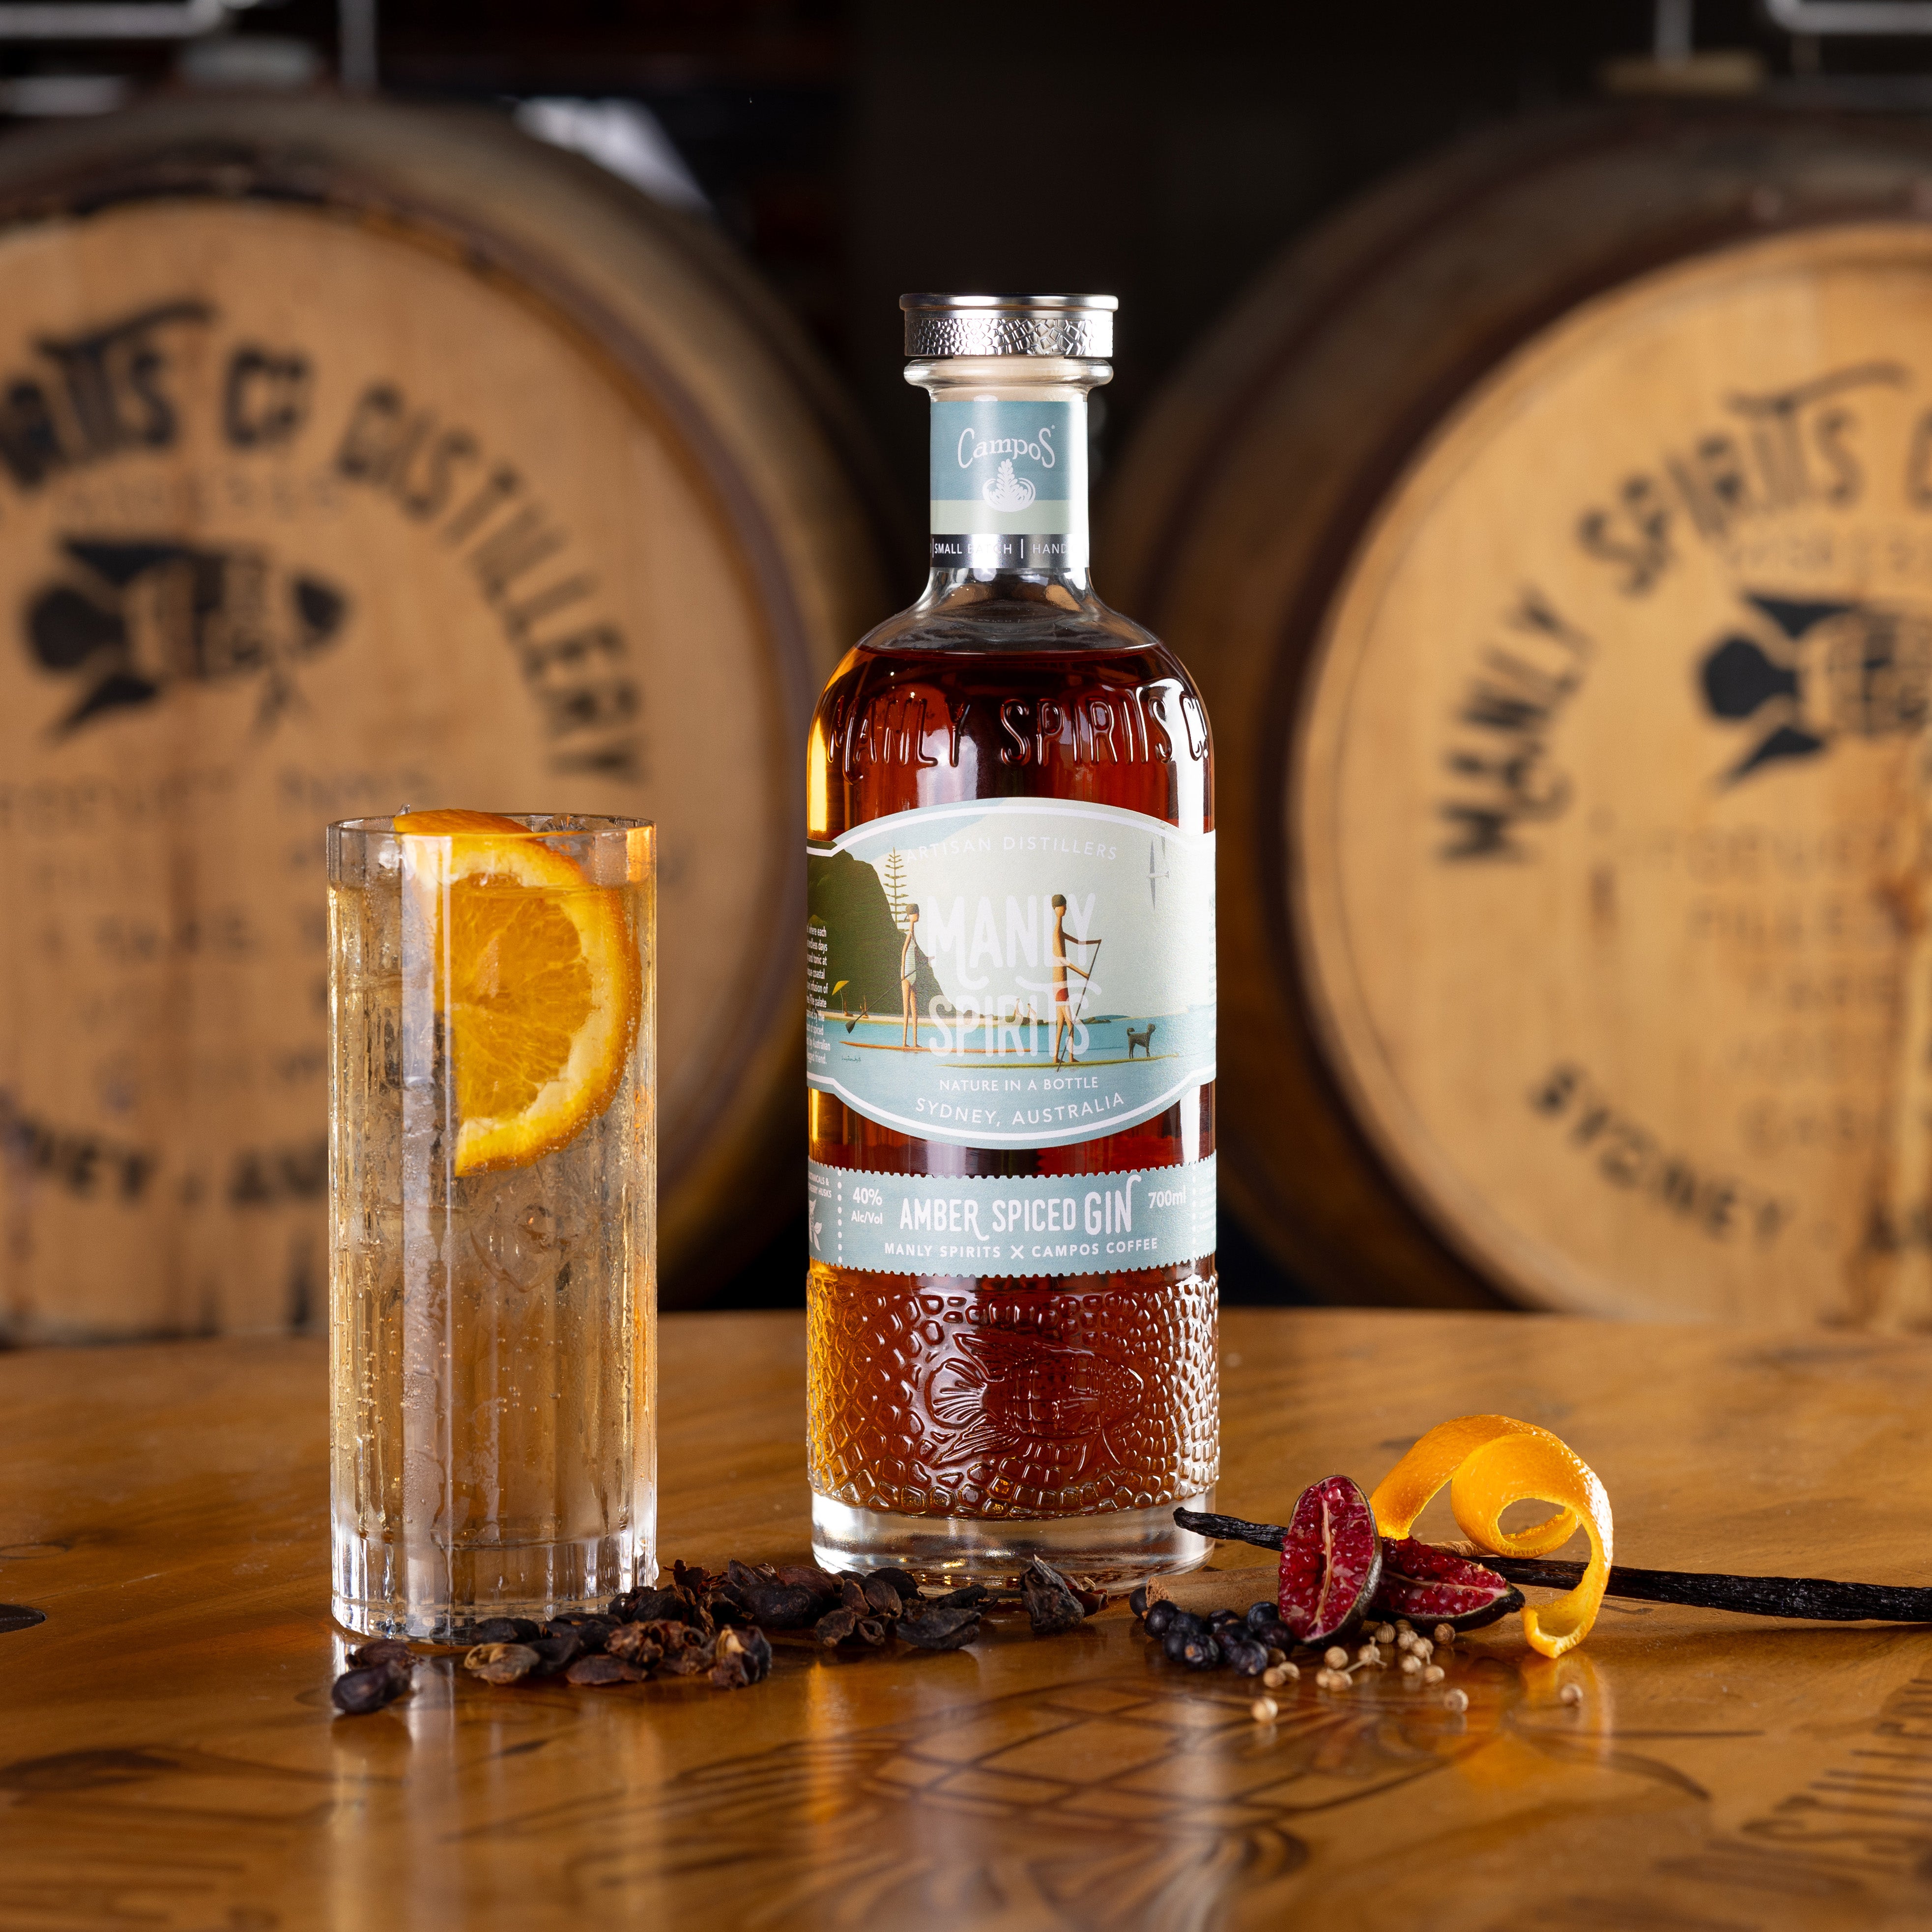 – Manly Spiced Gin Amber Spirits